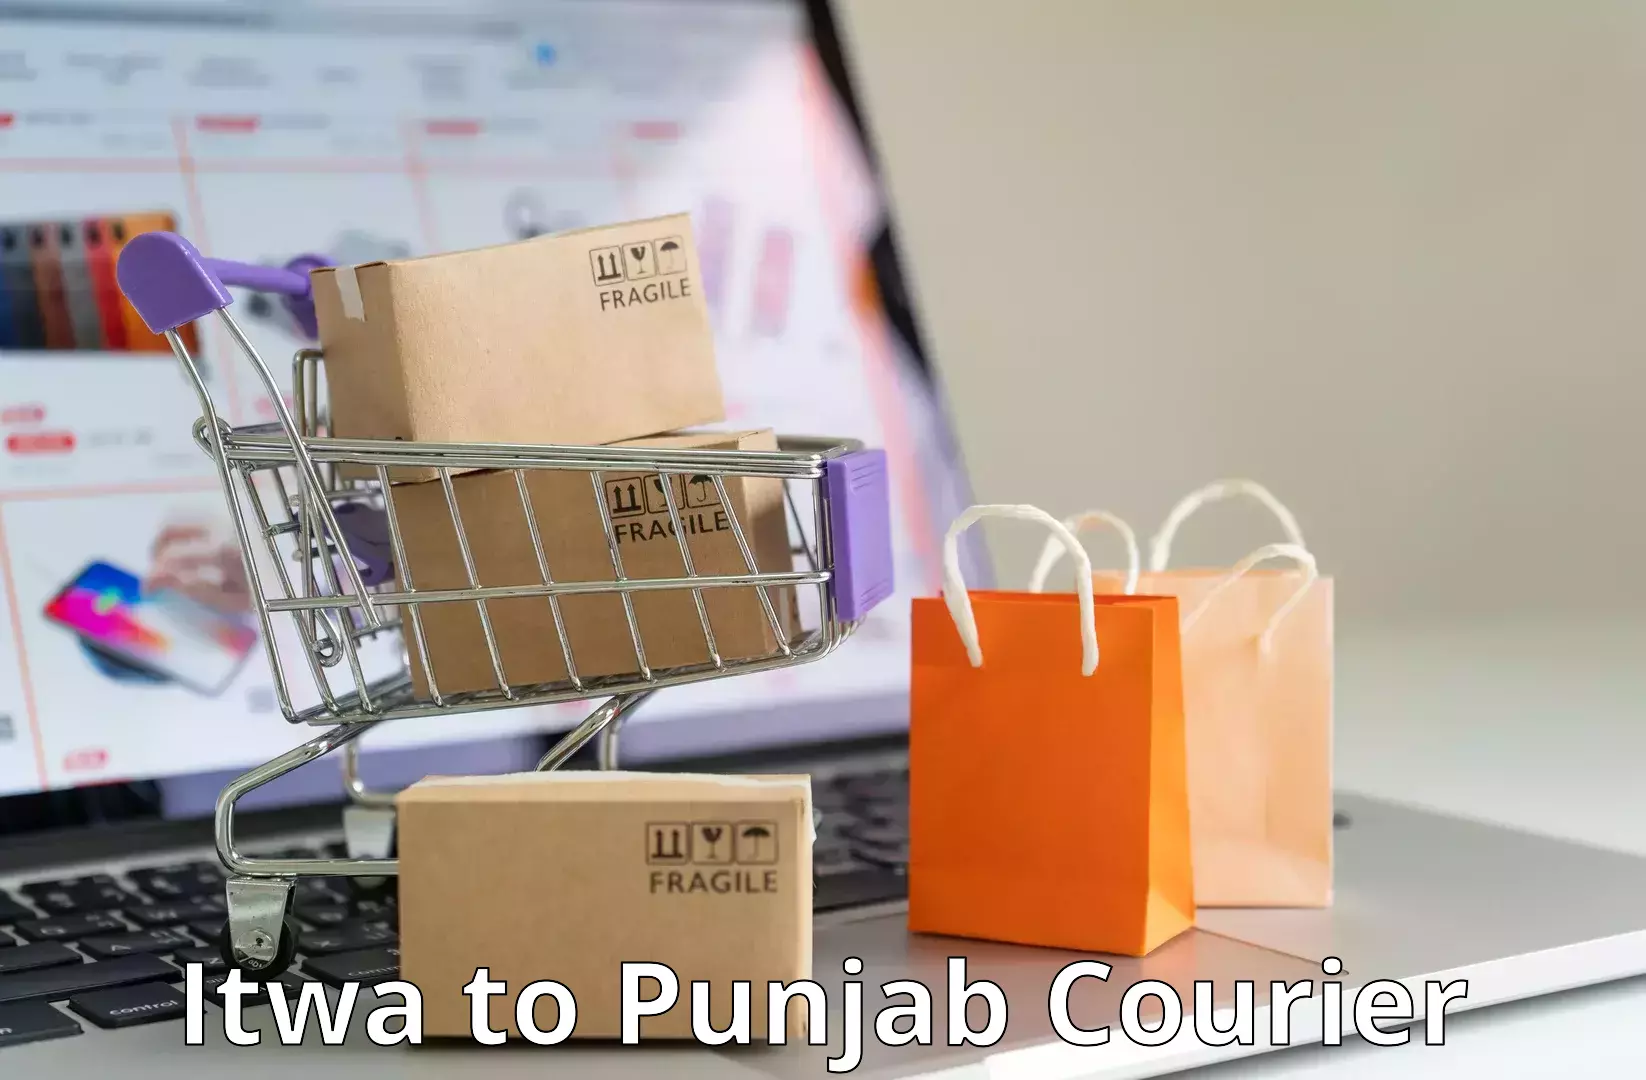 Flexible parcel services Itwa to Patiala